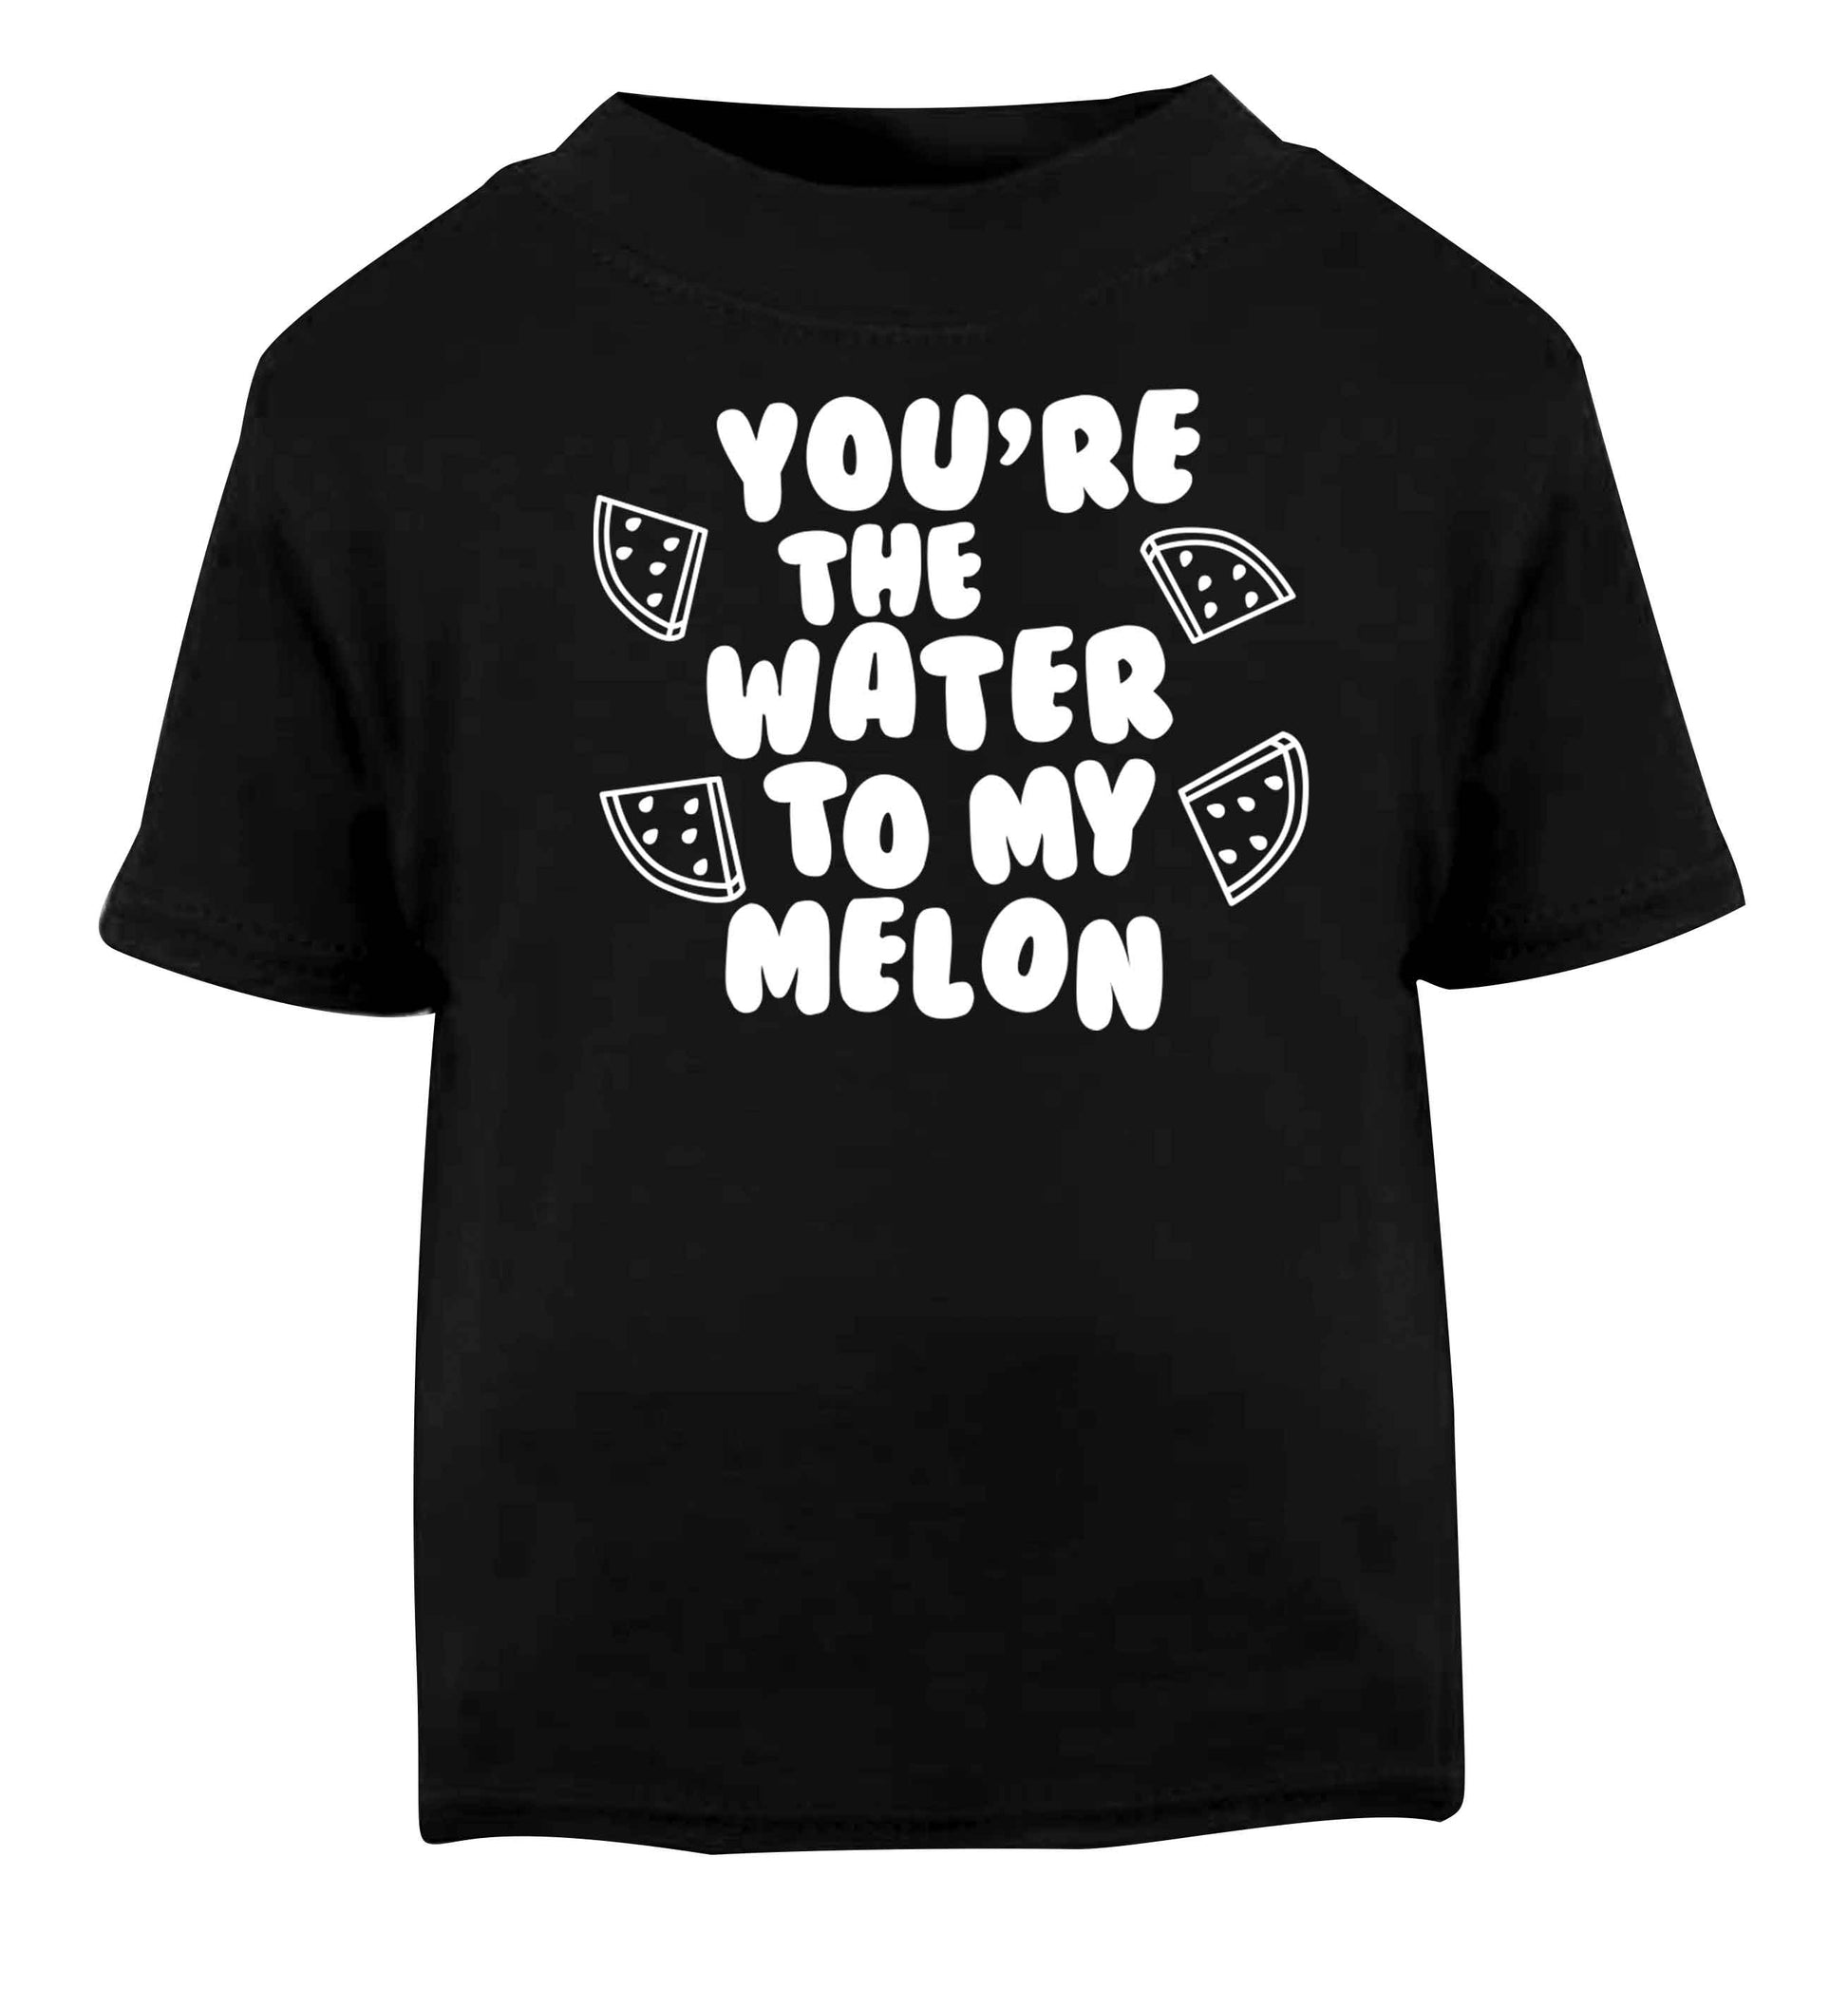 You're the water to my melon Black baby toddler Tshirt 2 years